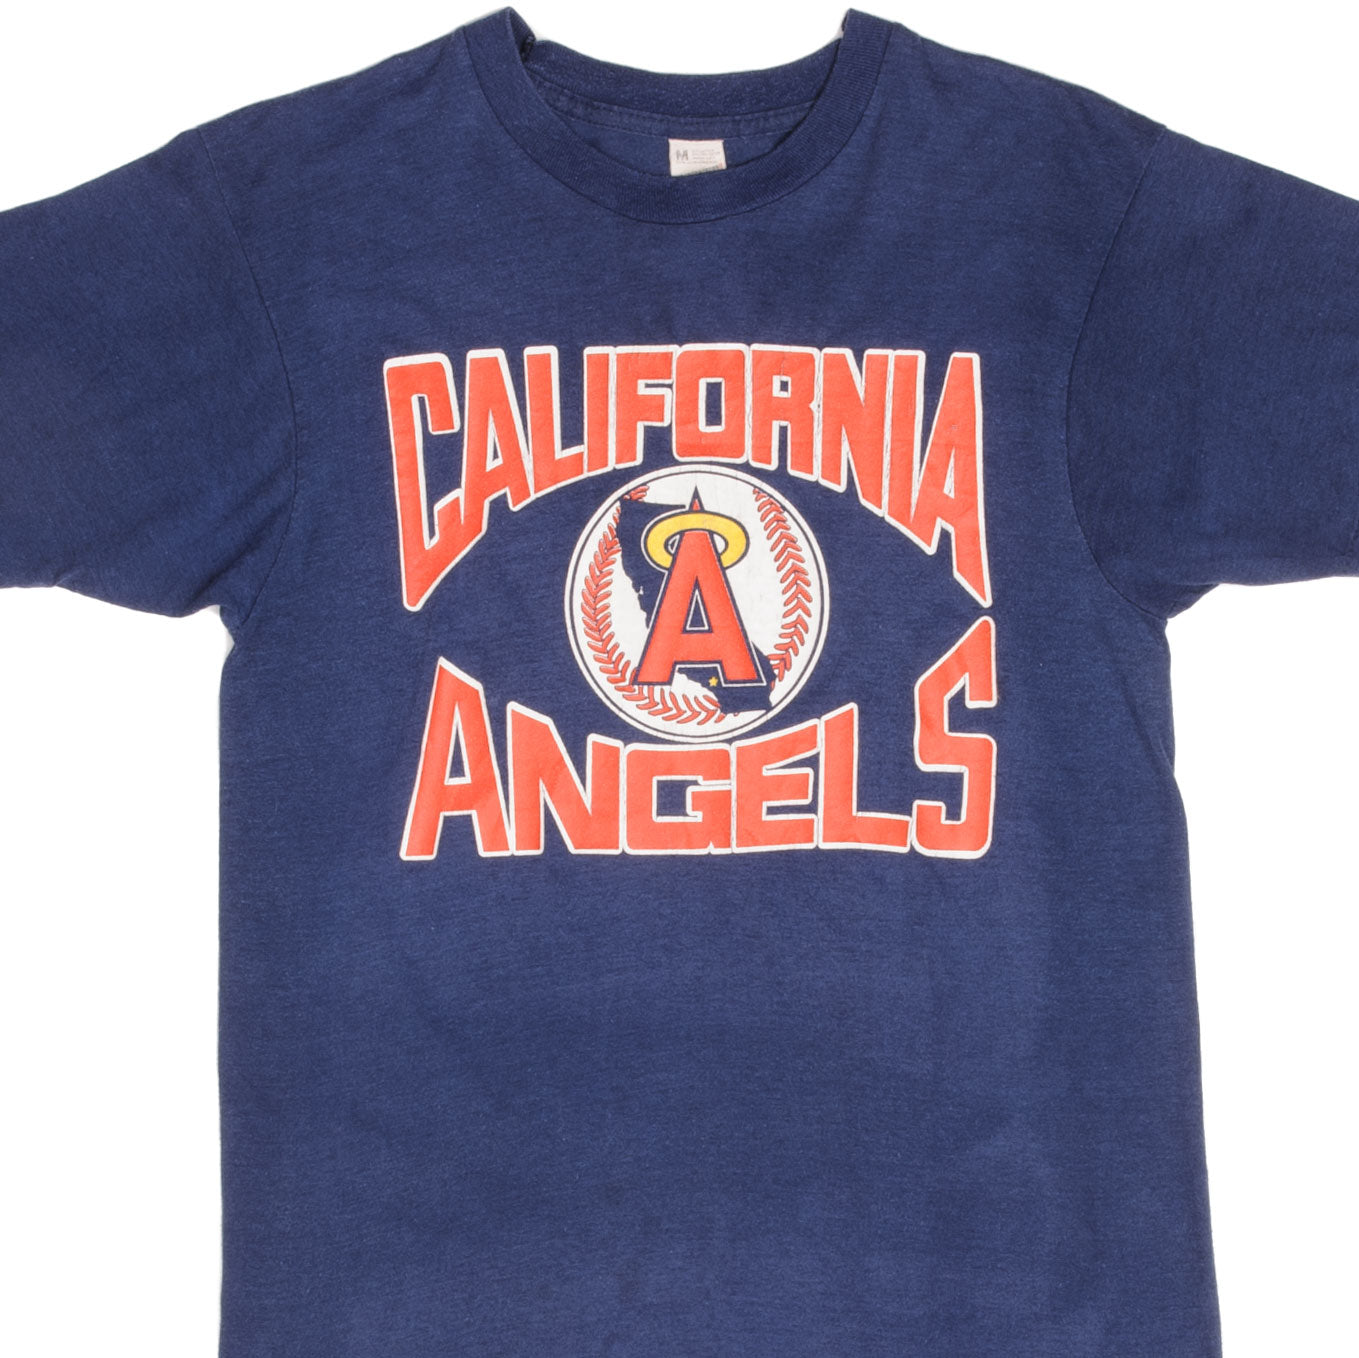 Vintage MLB California Angels Tee Shirt 1980s Size Small Made in USA